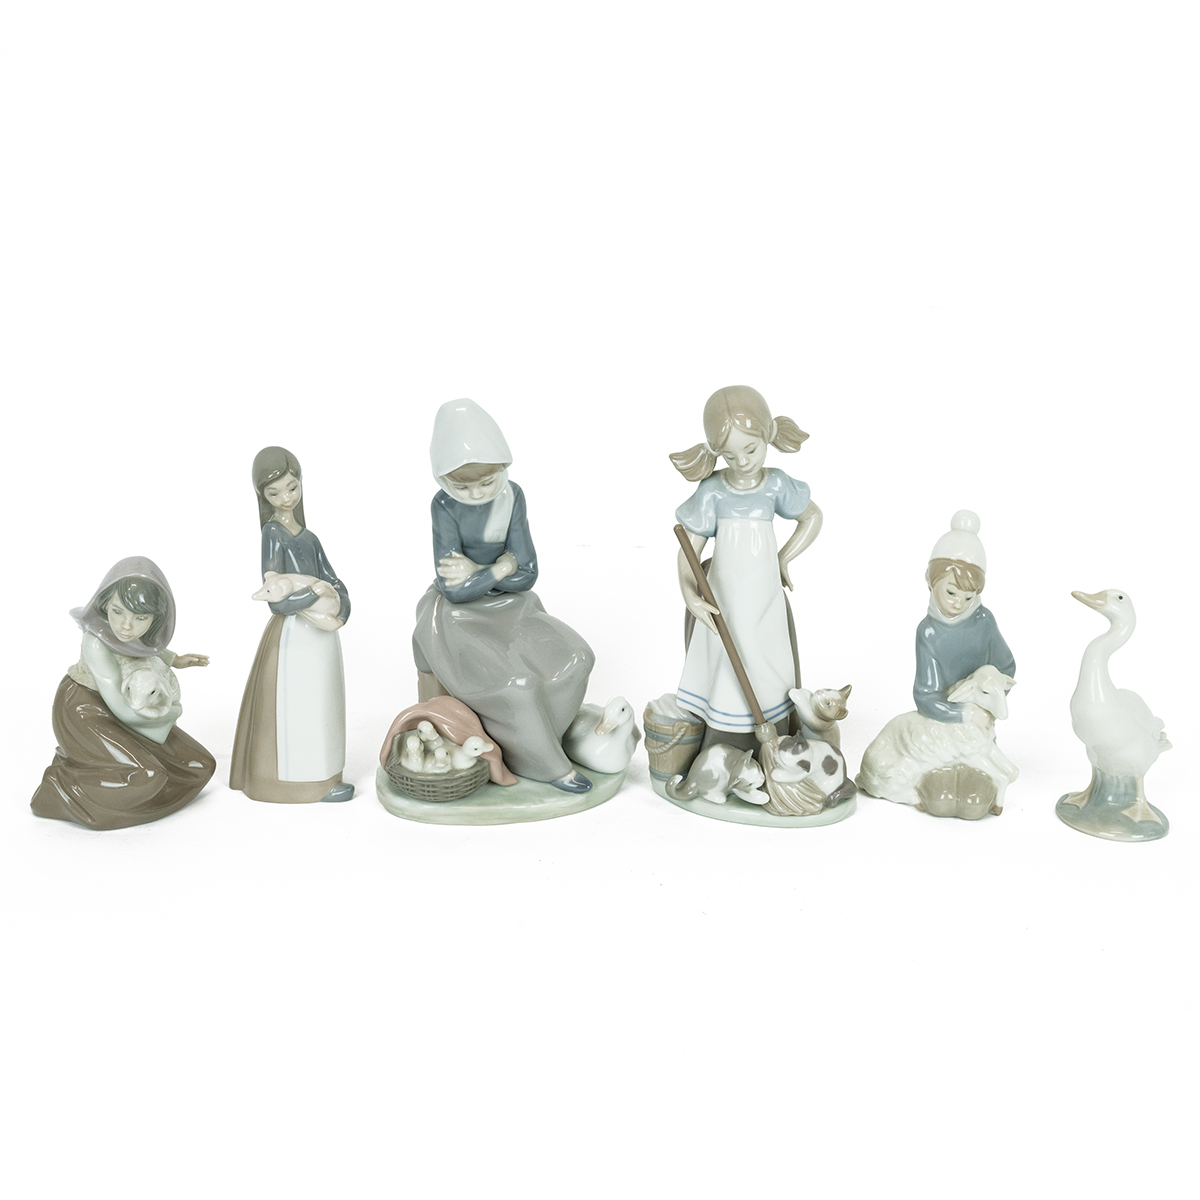 Lladro porcelain figurines to include models by Juan Huerta: "Playful Kittens" no 5233 (1984-2002...